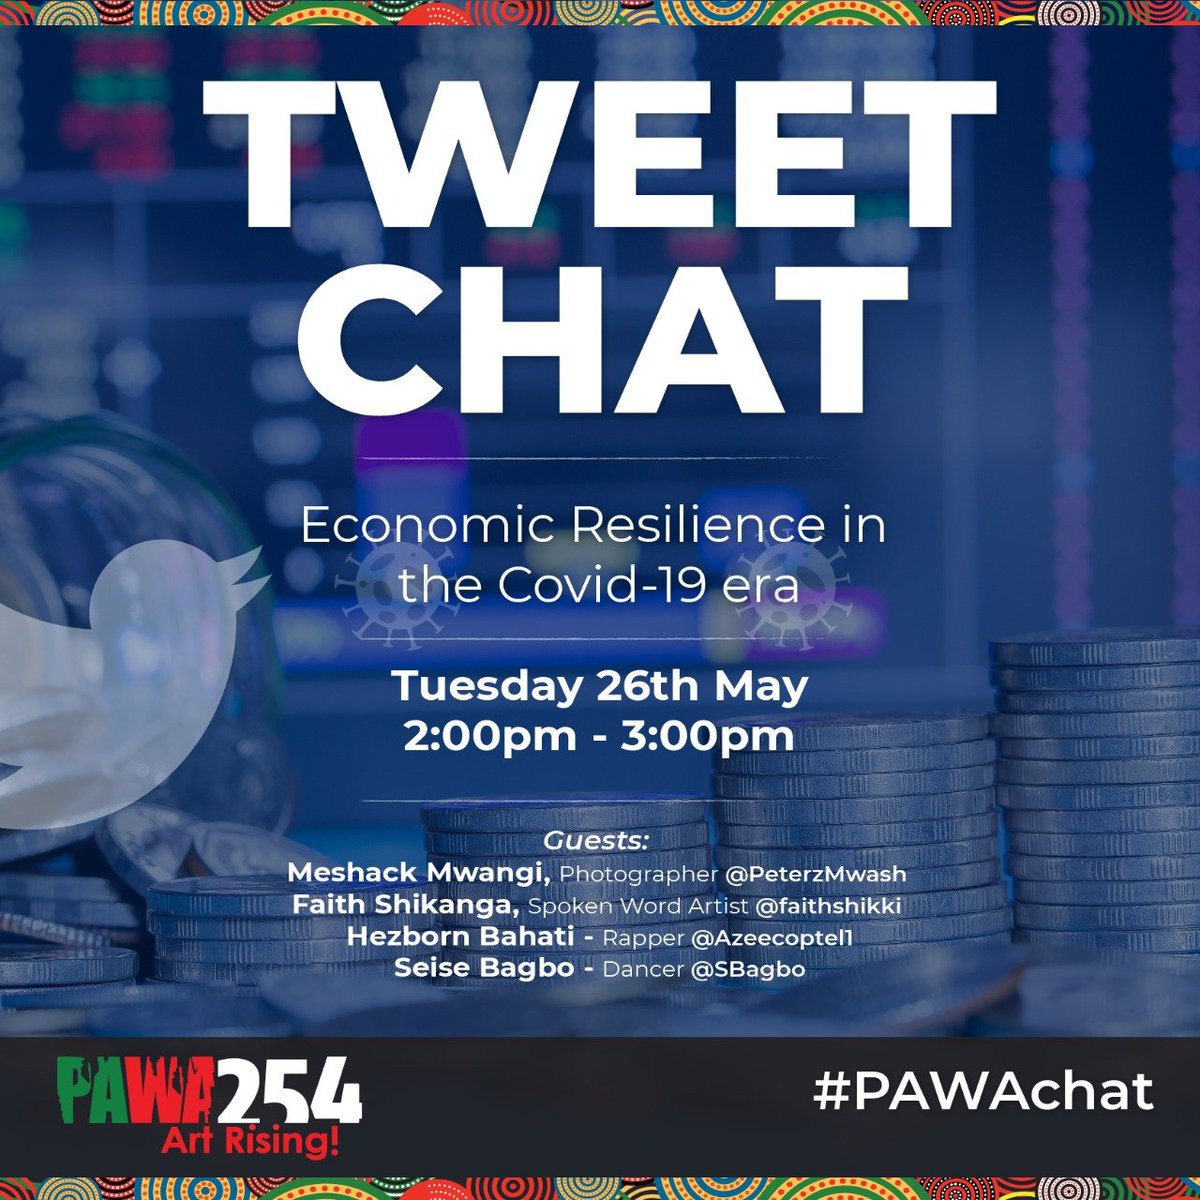 Join me at 2PM for a #PAWAChat on economic resilience in the covid-19 era with @Pawa254 @faithshiki @SBagbo @azeecoptel1